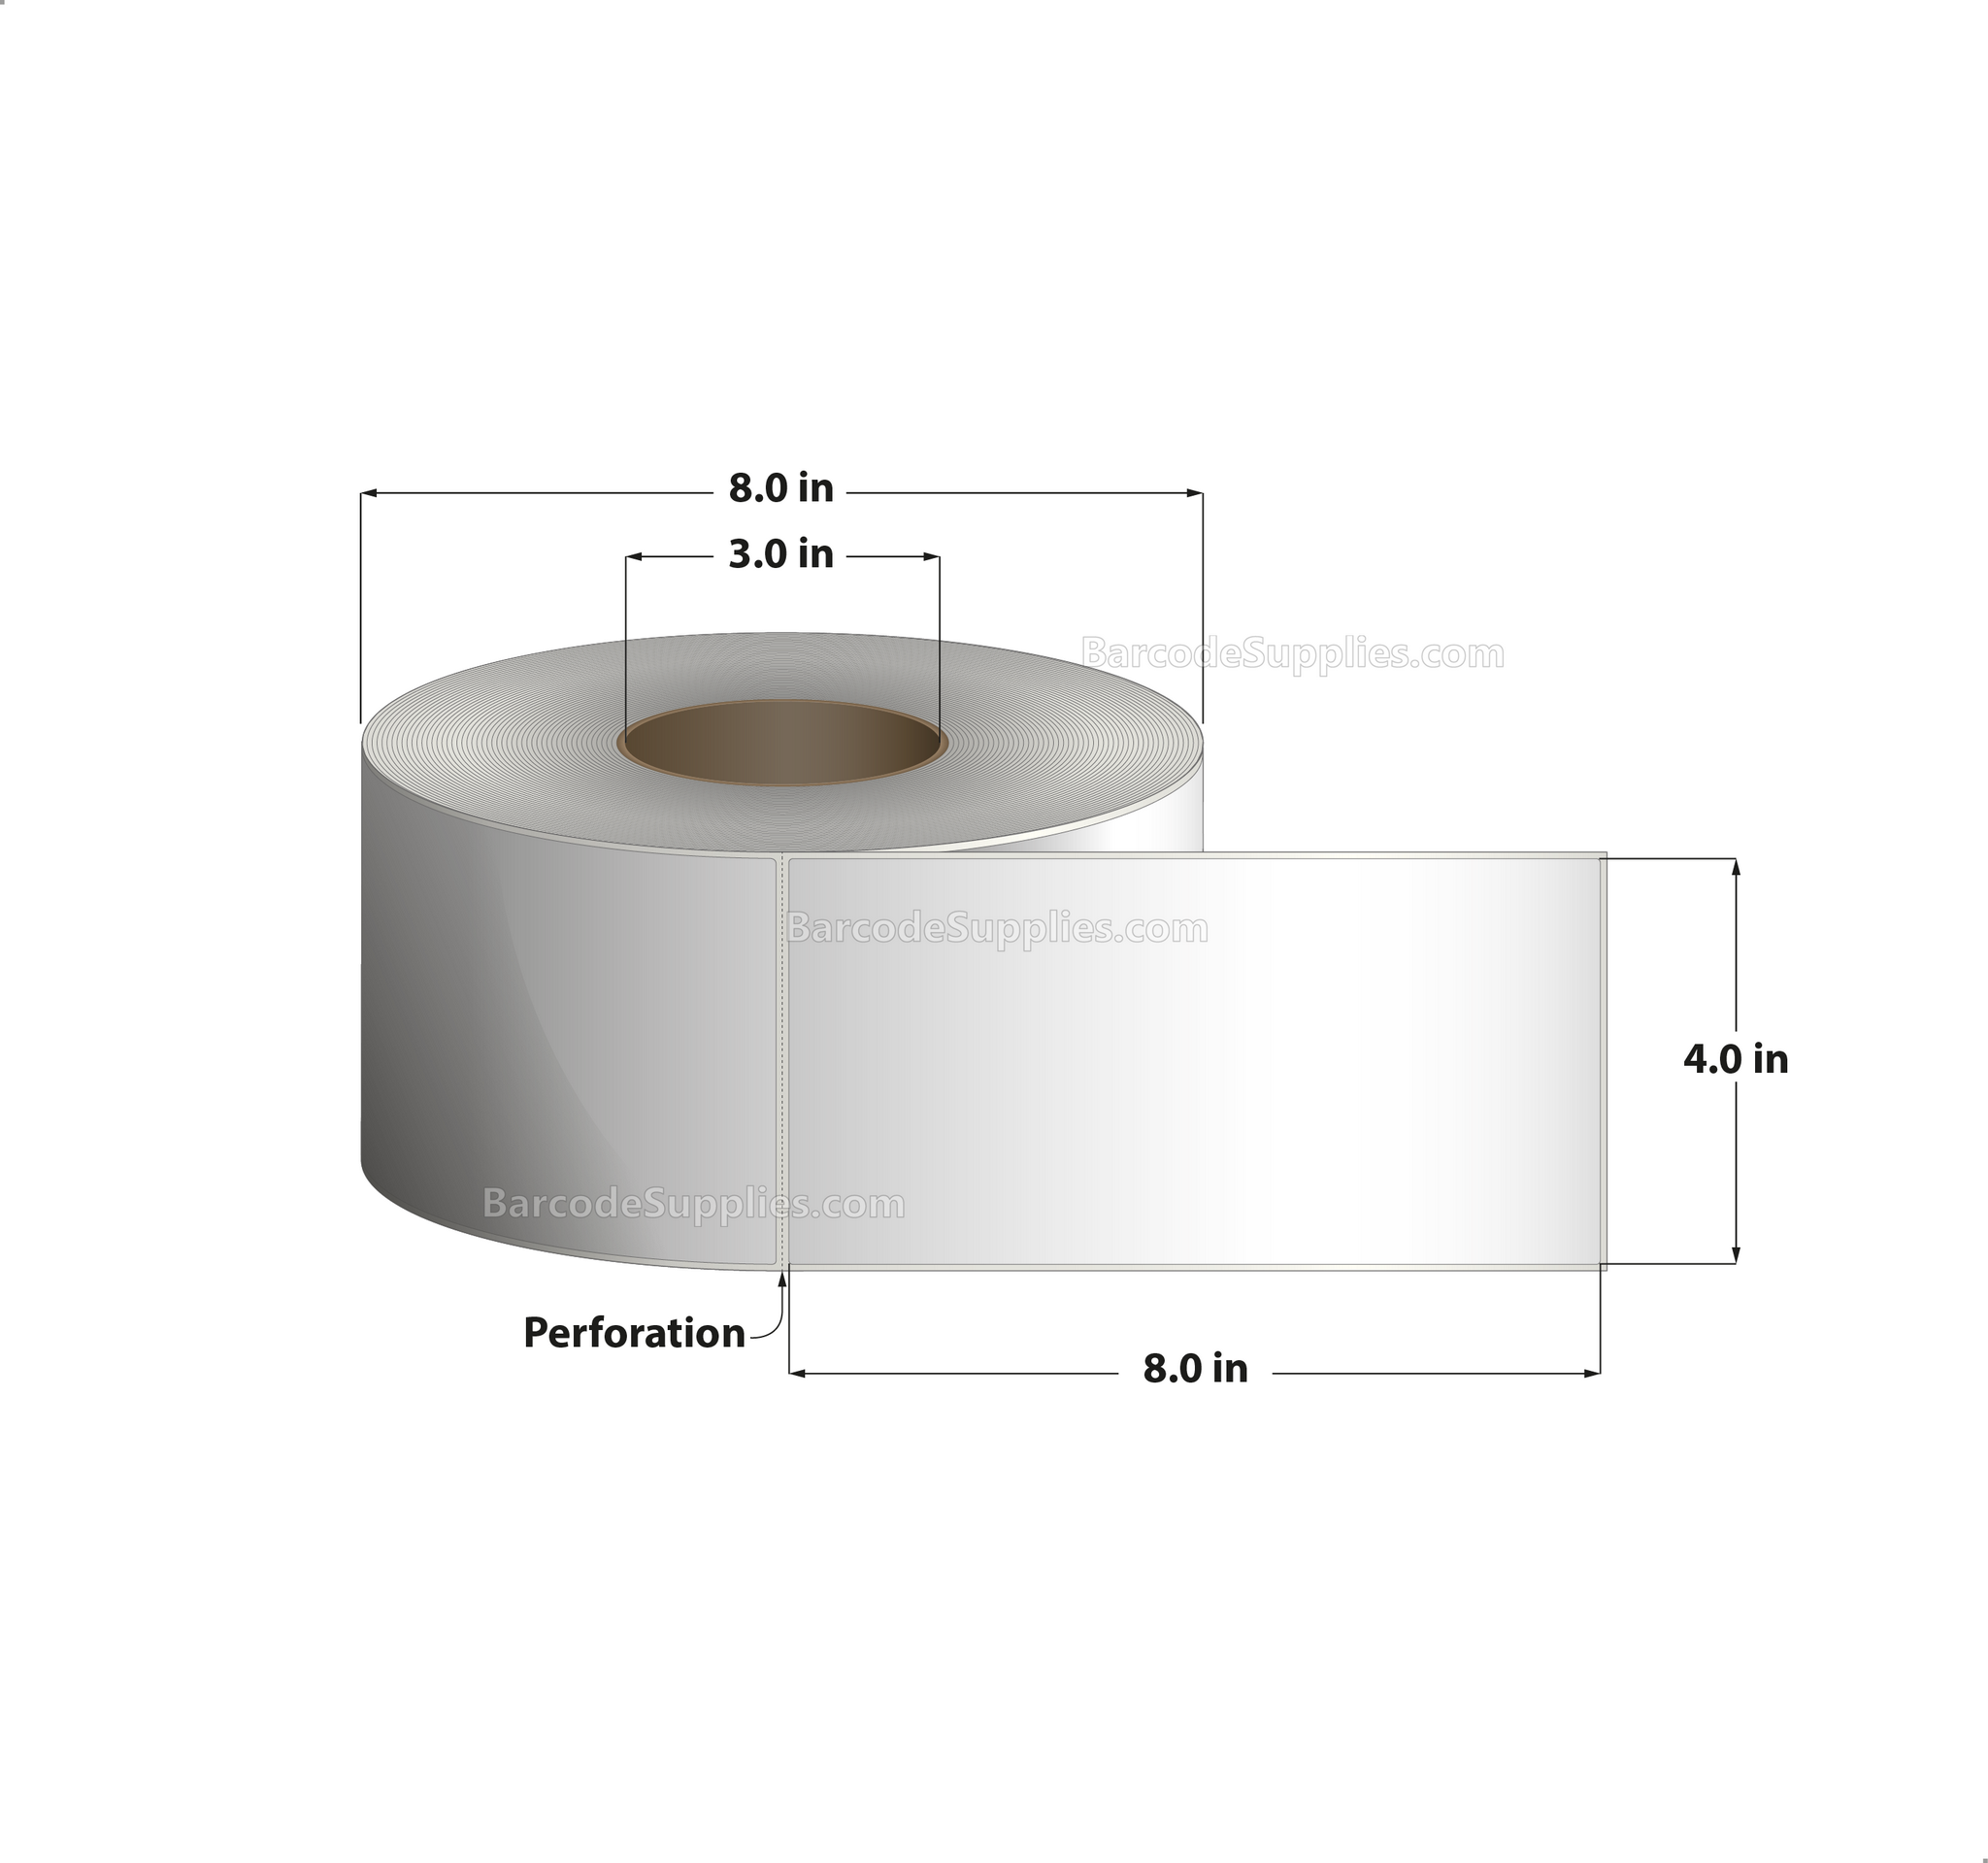 4 x 8 Thermal Transfer White Labels With Rubber Adhesive - Perforated - 800 Labels Per Roll - Carton Of 4 Rolls - 3200 Labels Total - MPN: CTT400800-3P